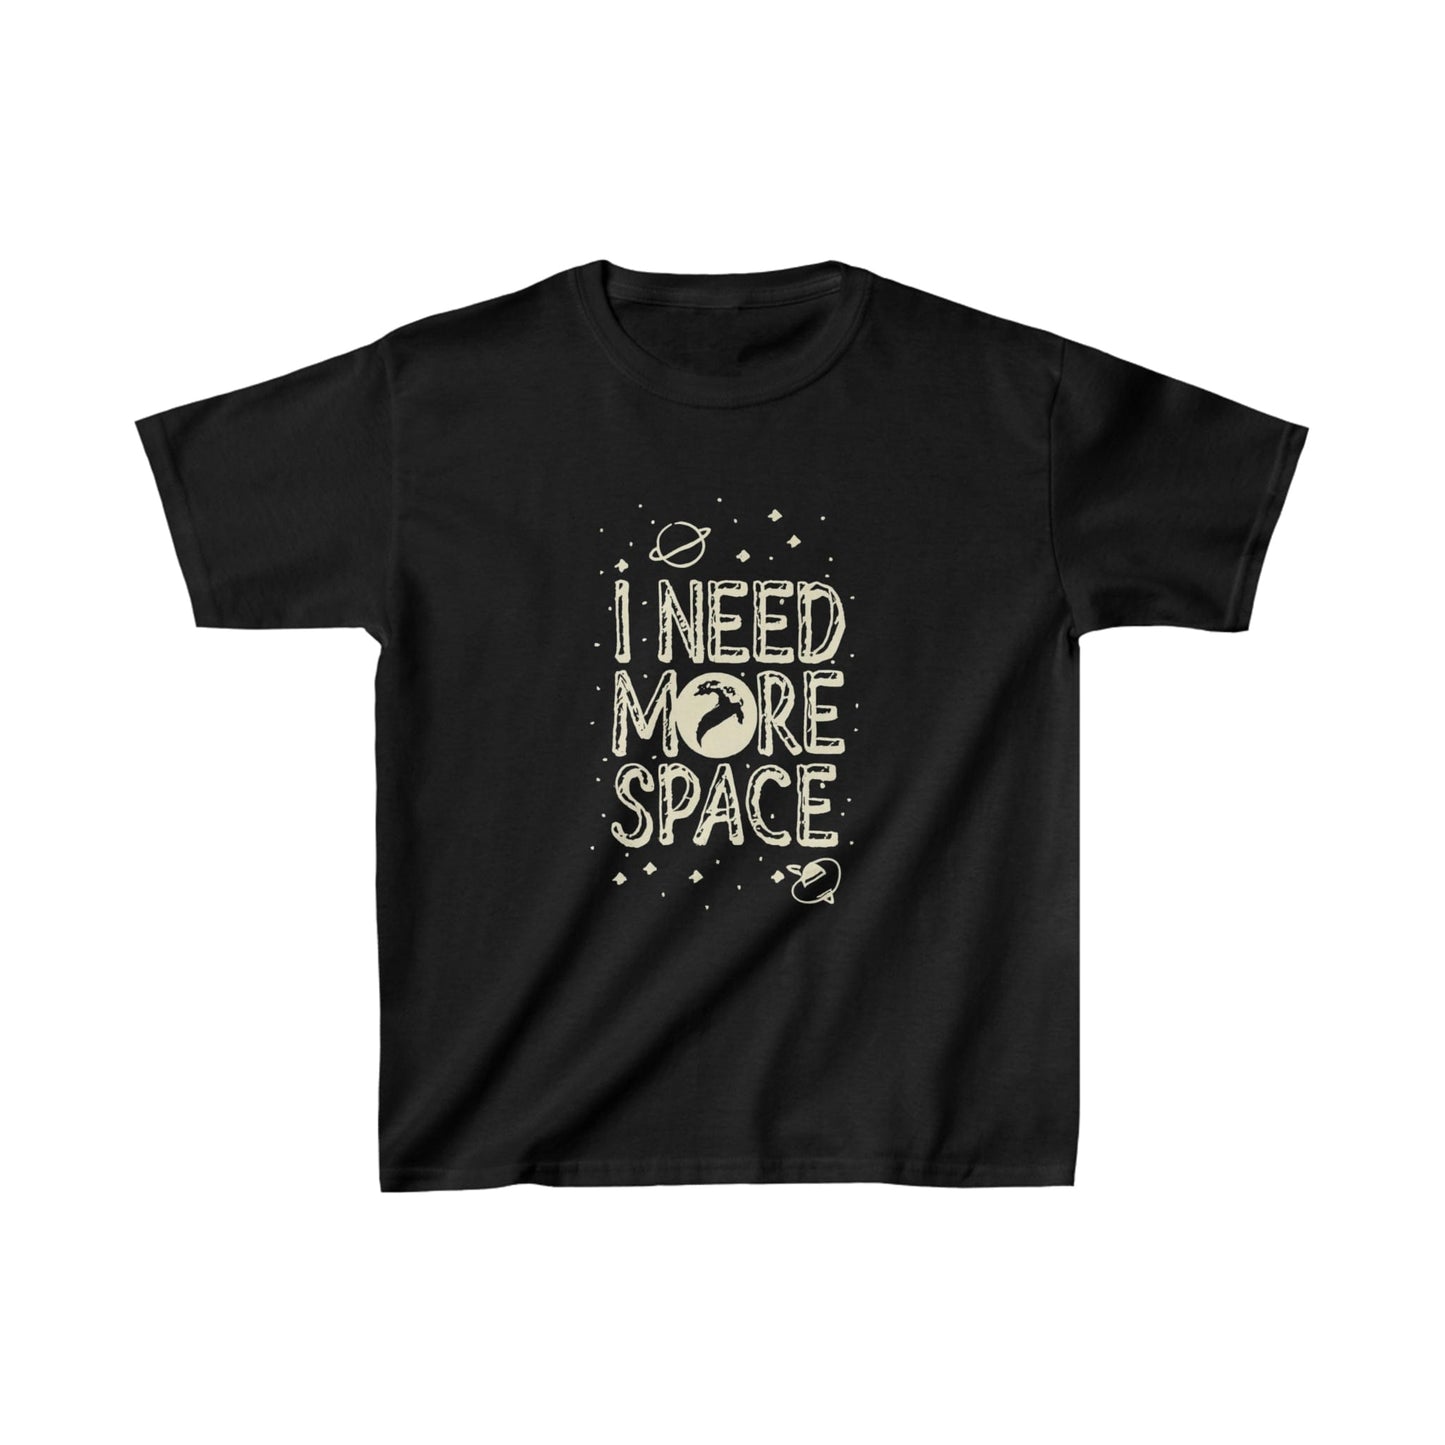 Kids clothes XS / Black Youth I Need More Space T-Shirt